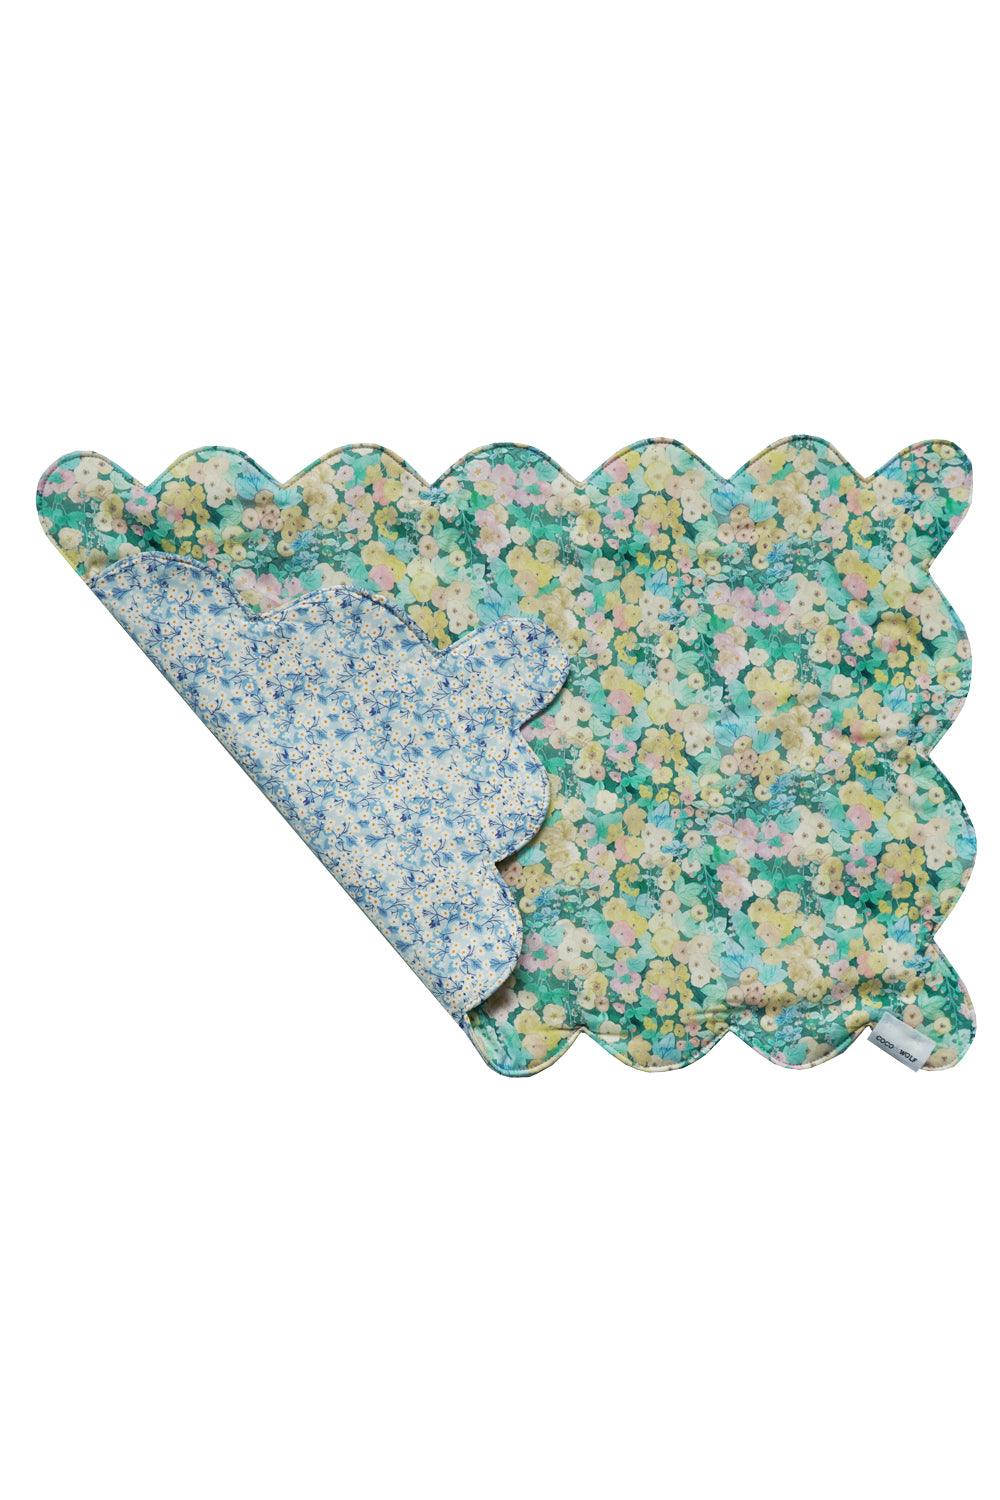 Reversible Scalloped Placemat made with Liberty Fabric HOLLYHOCKS & MITSI VALERIA - Coco & Wolf